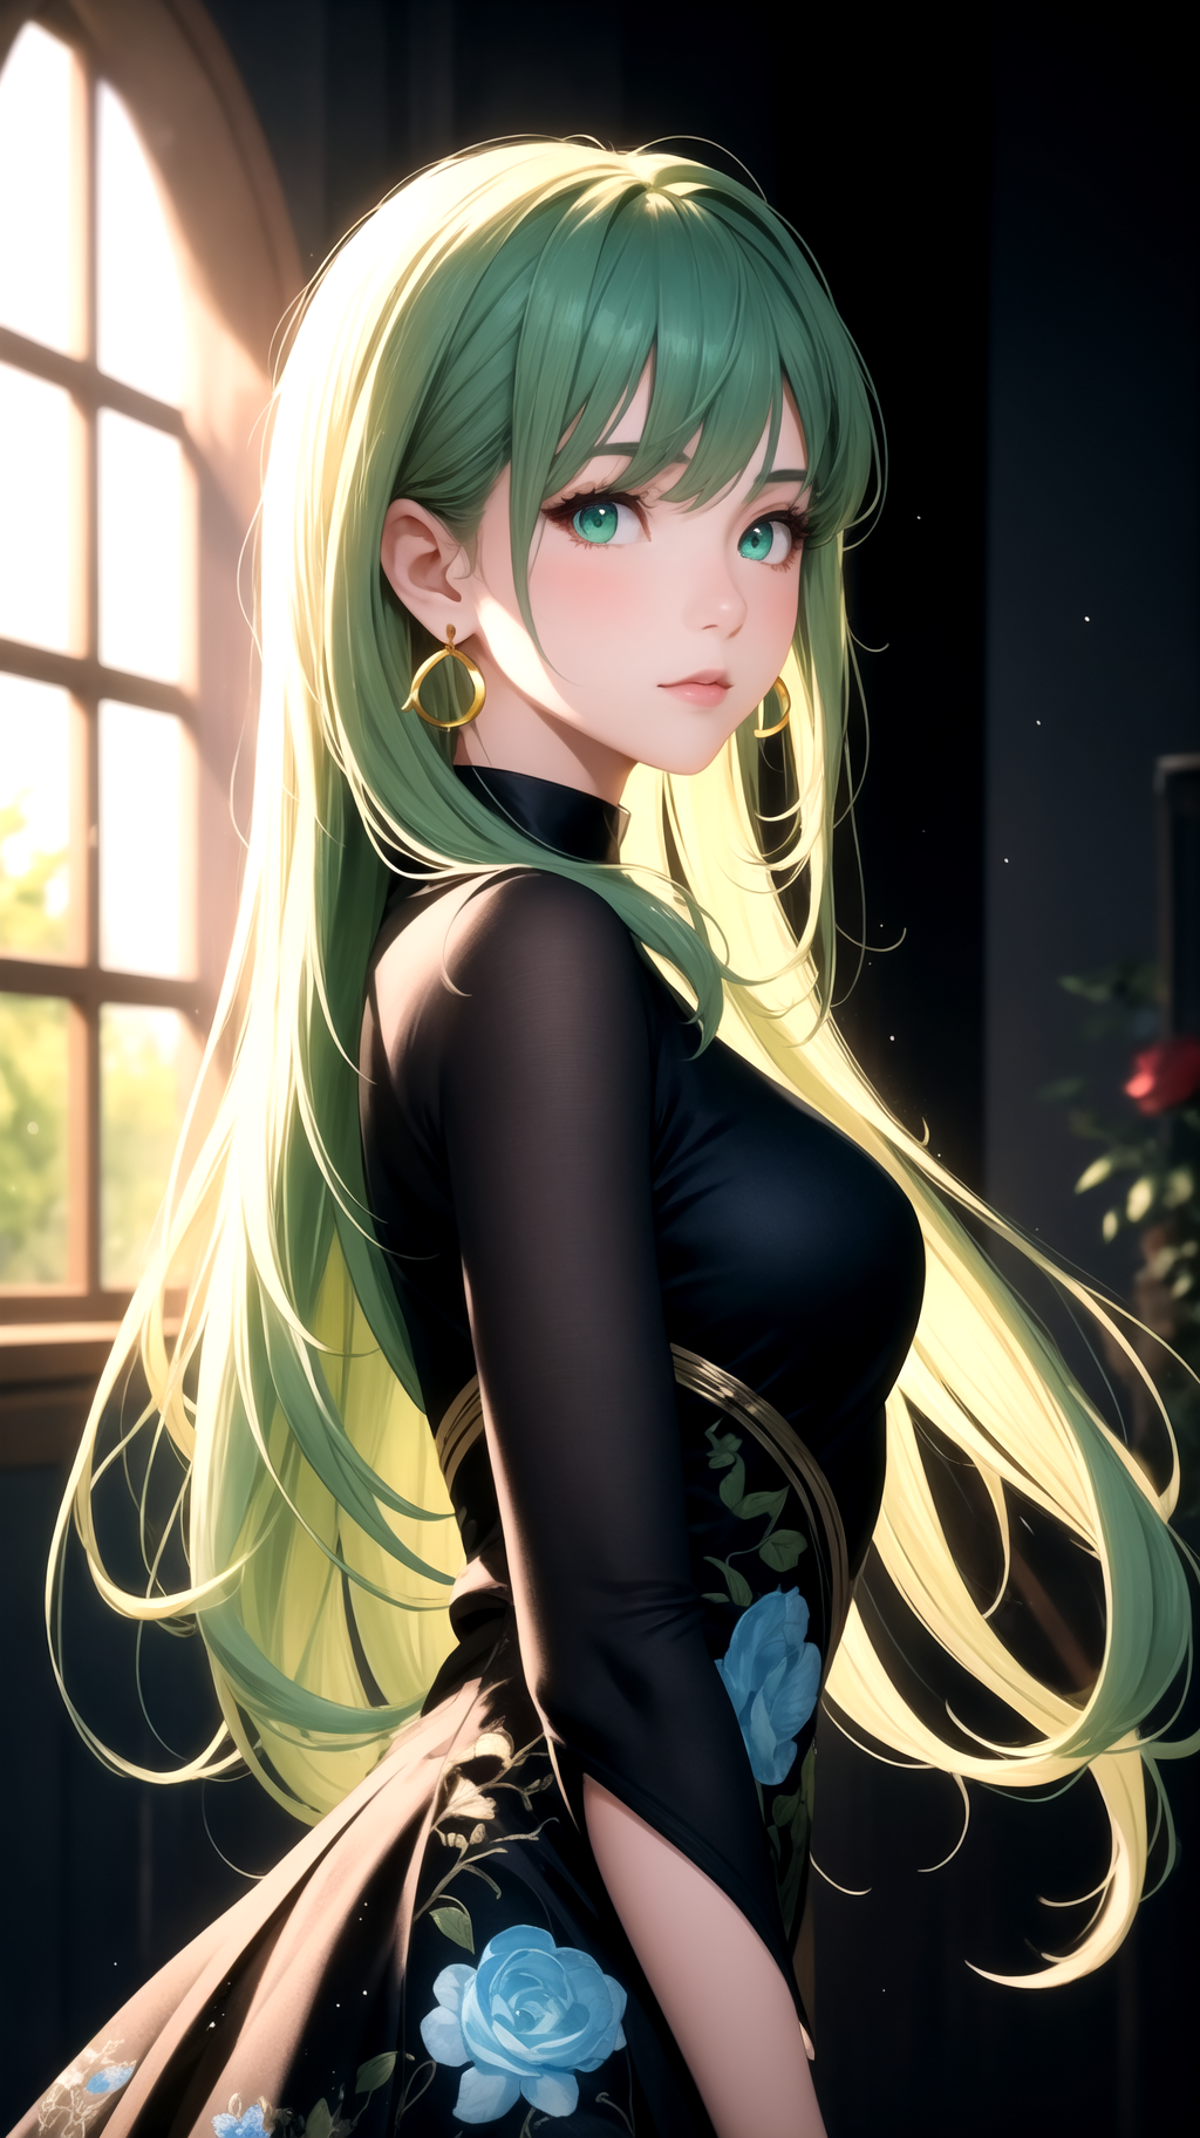 A beautifully drawn anime girl in a black shirt with yellow earrings.